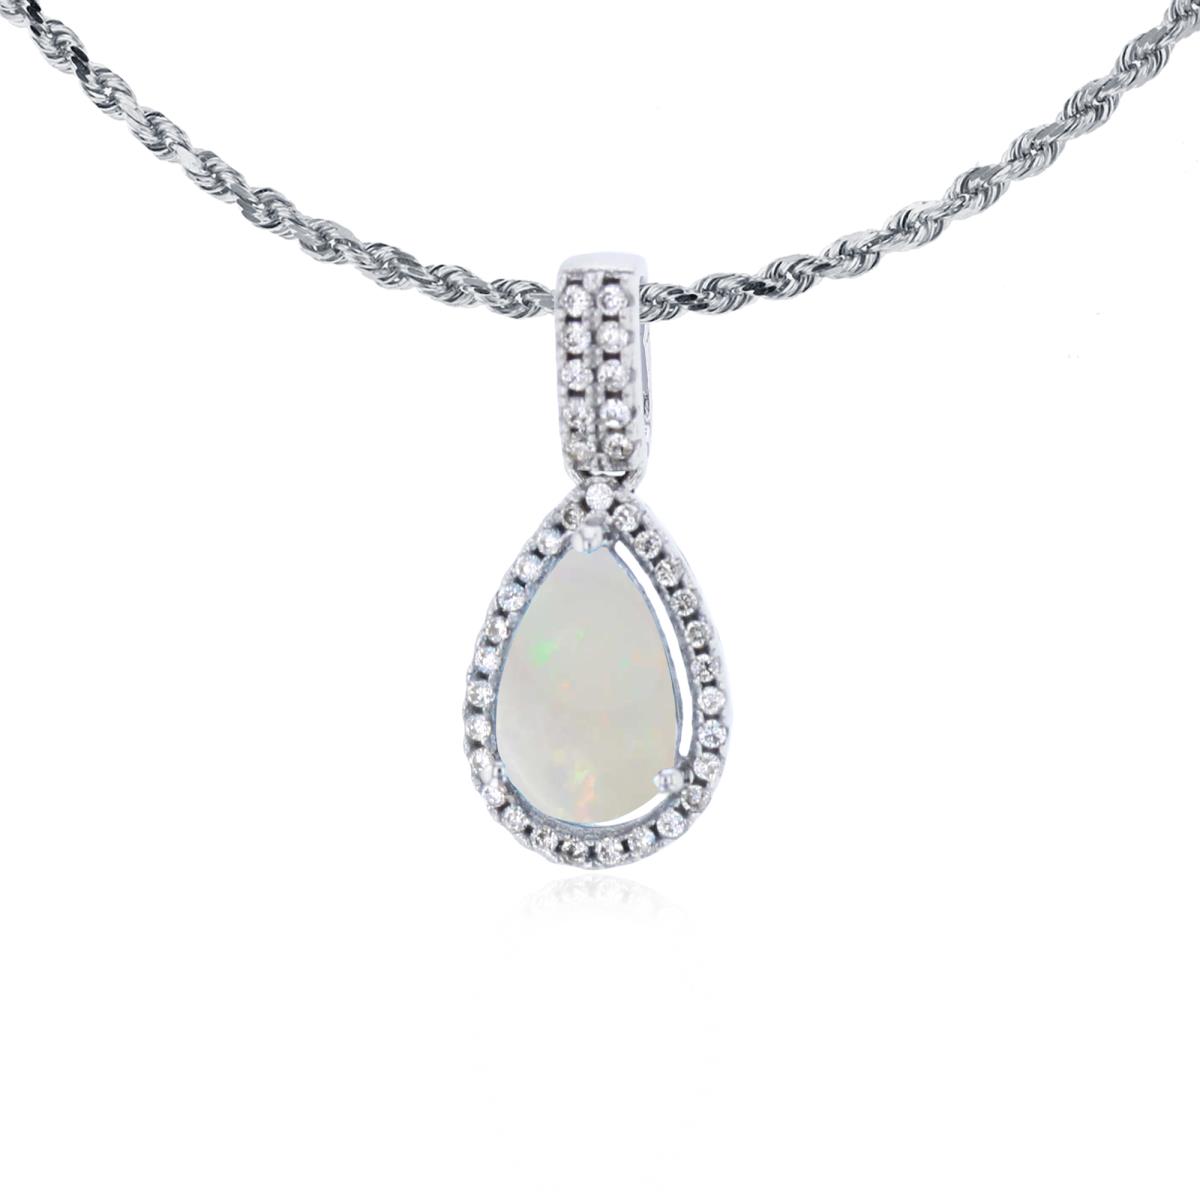 14K White Gold 8x5mm Pear Cut Opal & 0.11 CTTW Diamond Halo 18" Rope Chain Necklace